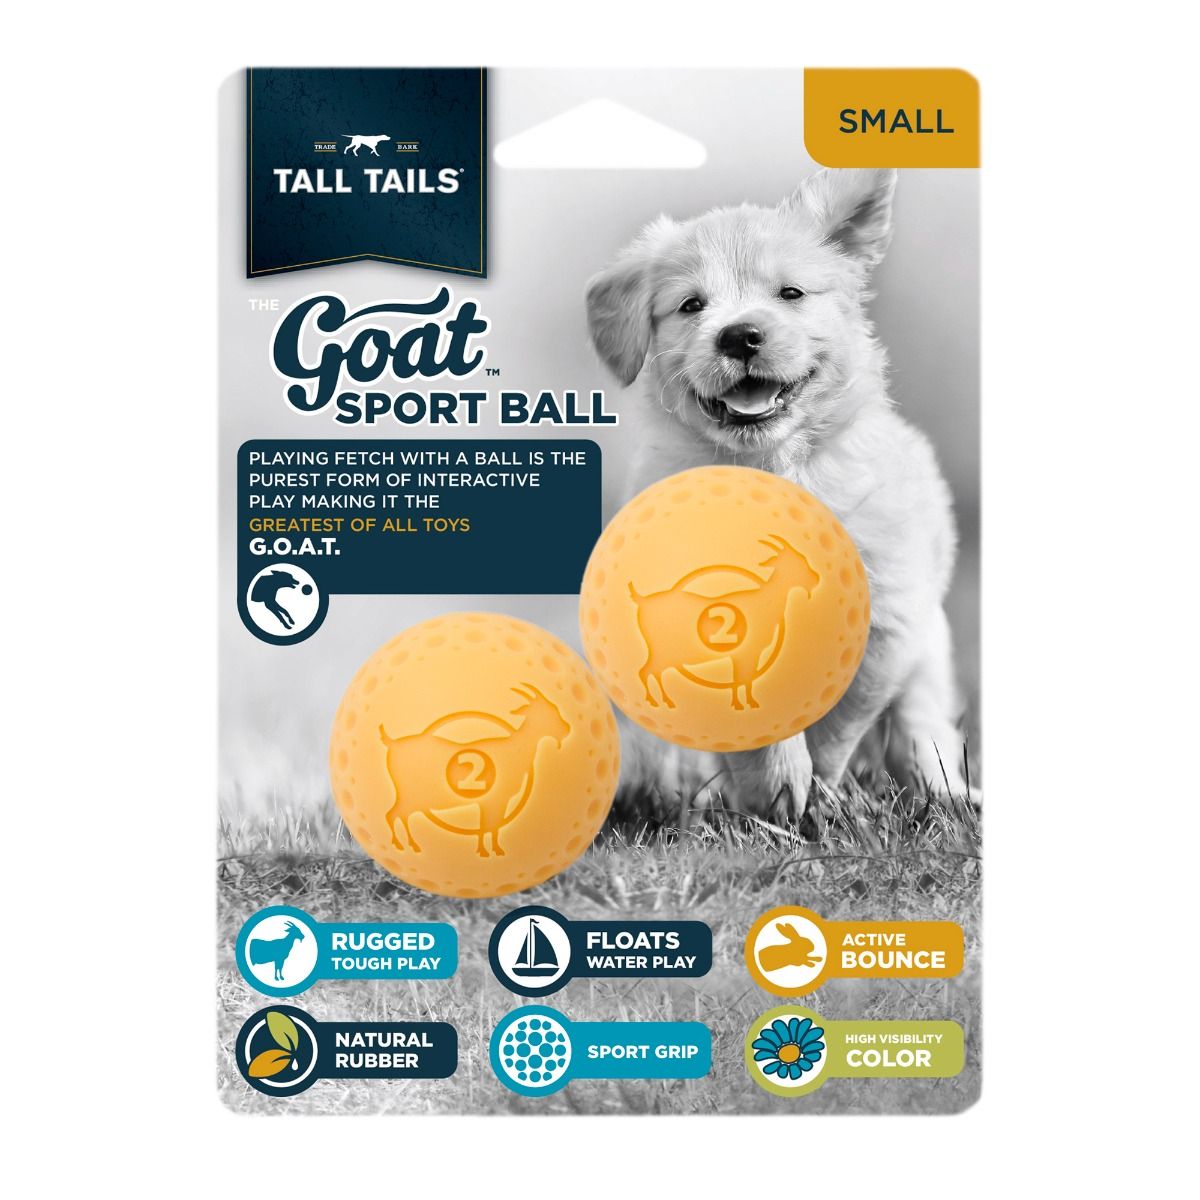 Tall Tails Goat Sport Ball Small 2" Two Pack